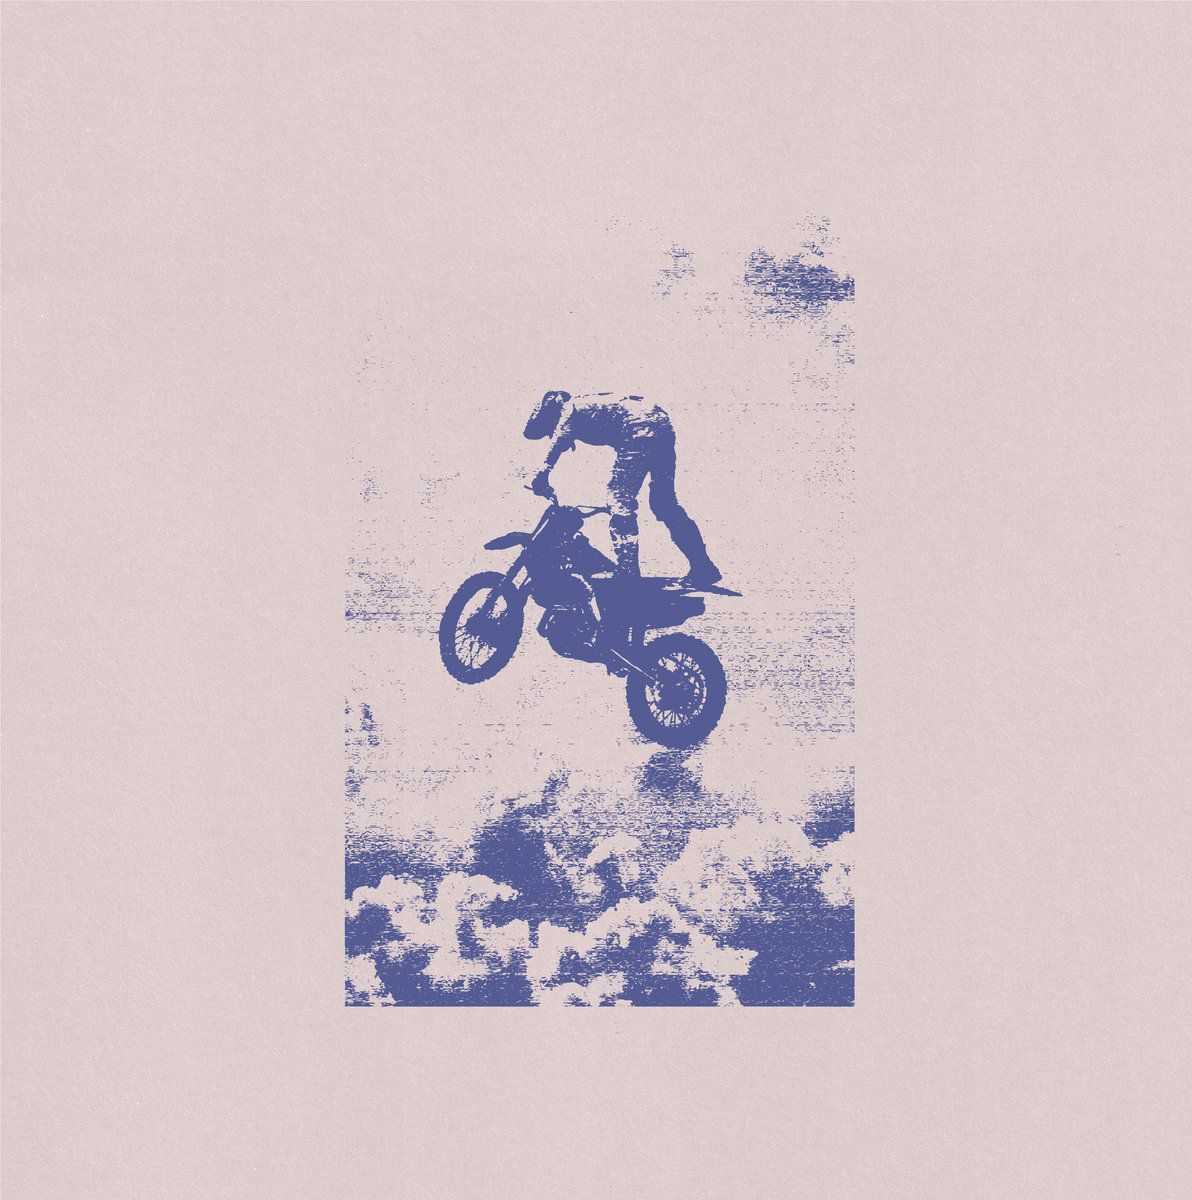 old saw country tropics album art, blue-tinged photo of a person doing as jump on a motorbike